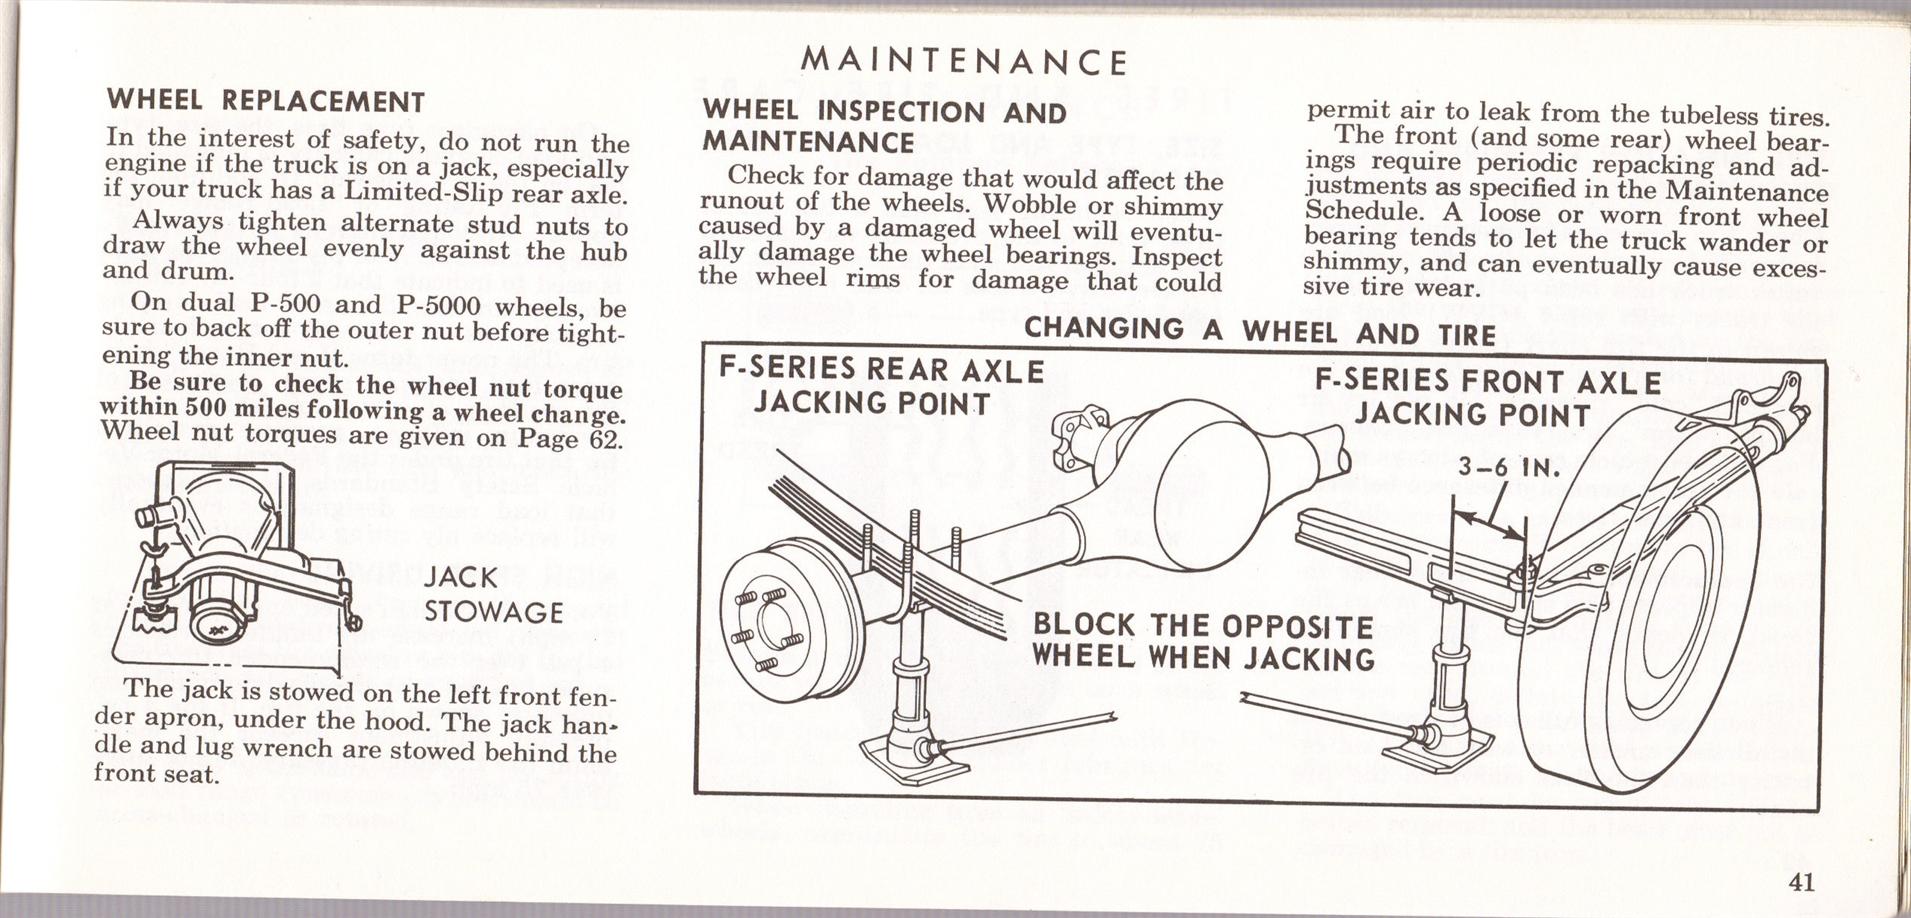 1969_Ford_Truck_Owners_Manual_Pg41